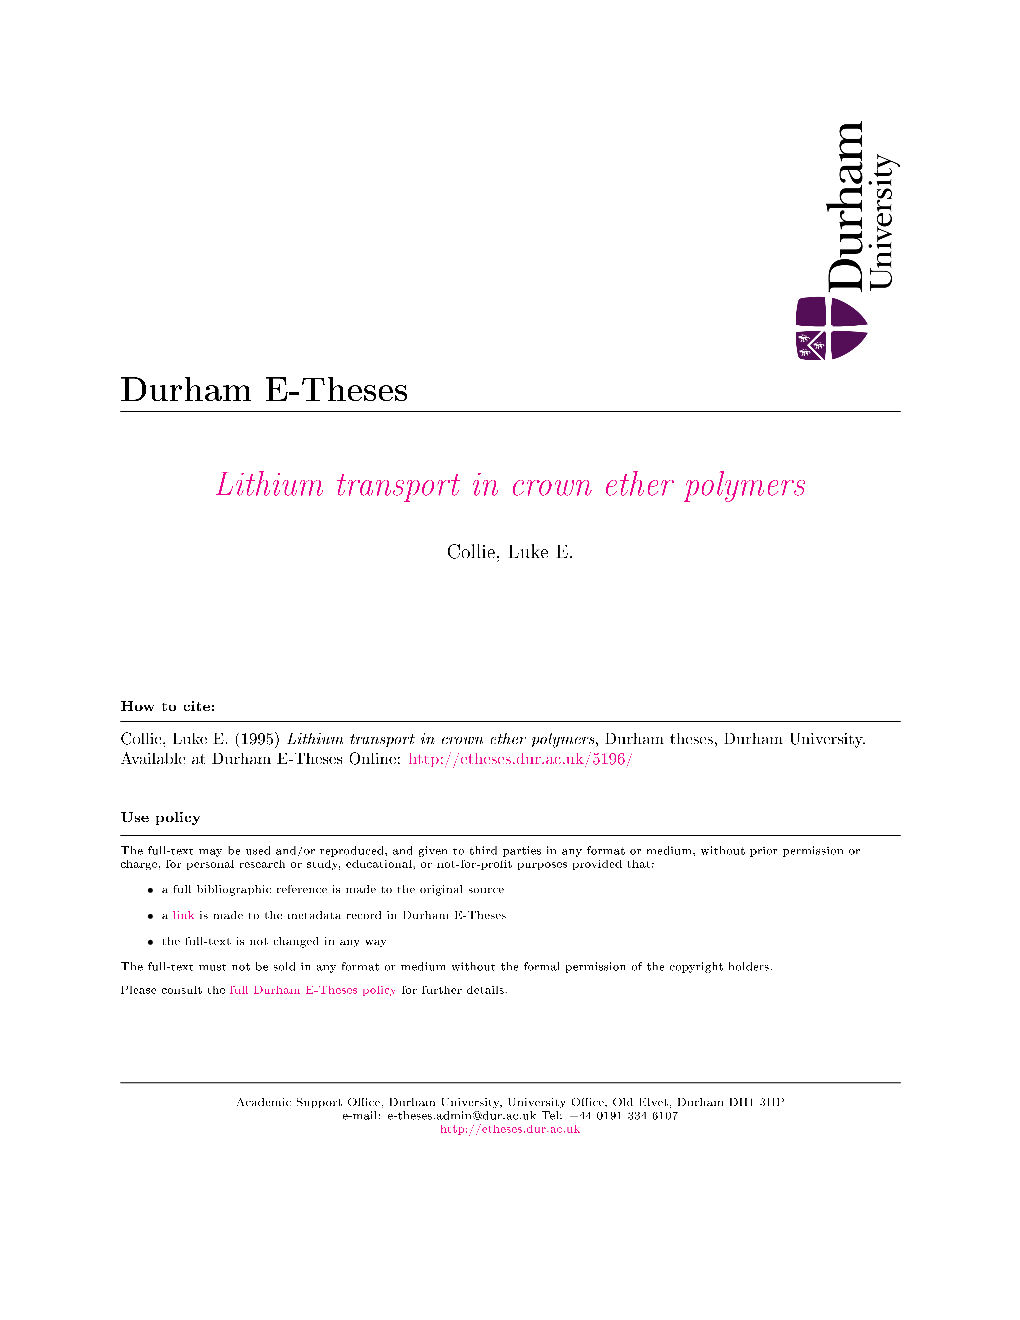 Lithium Transport in Crown Ether Polymers